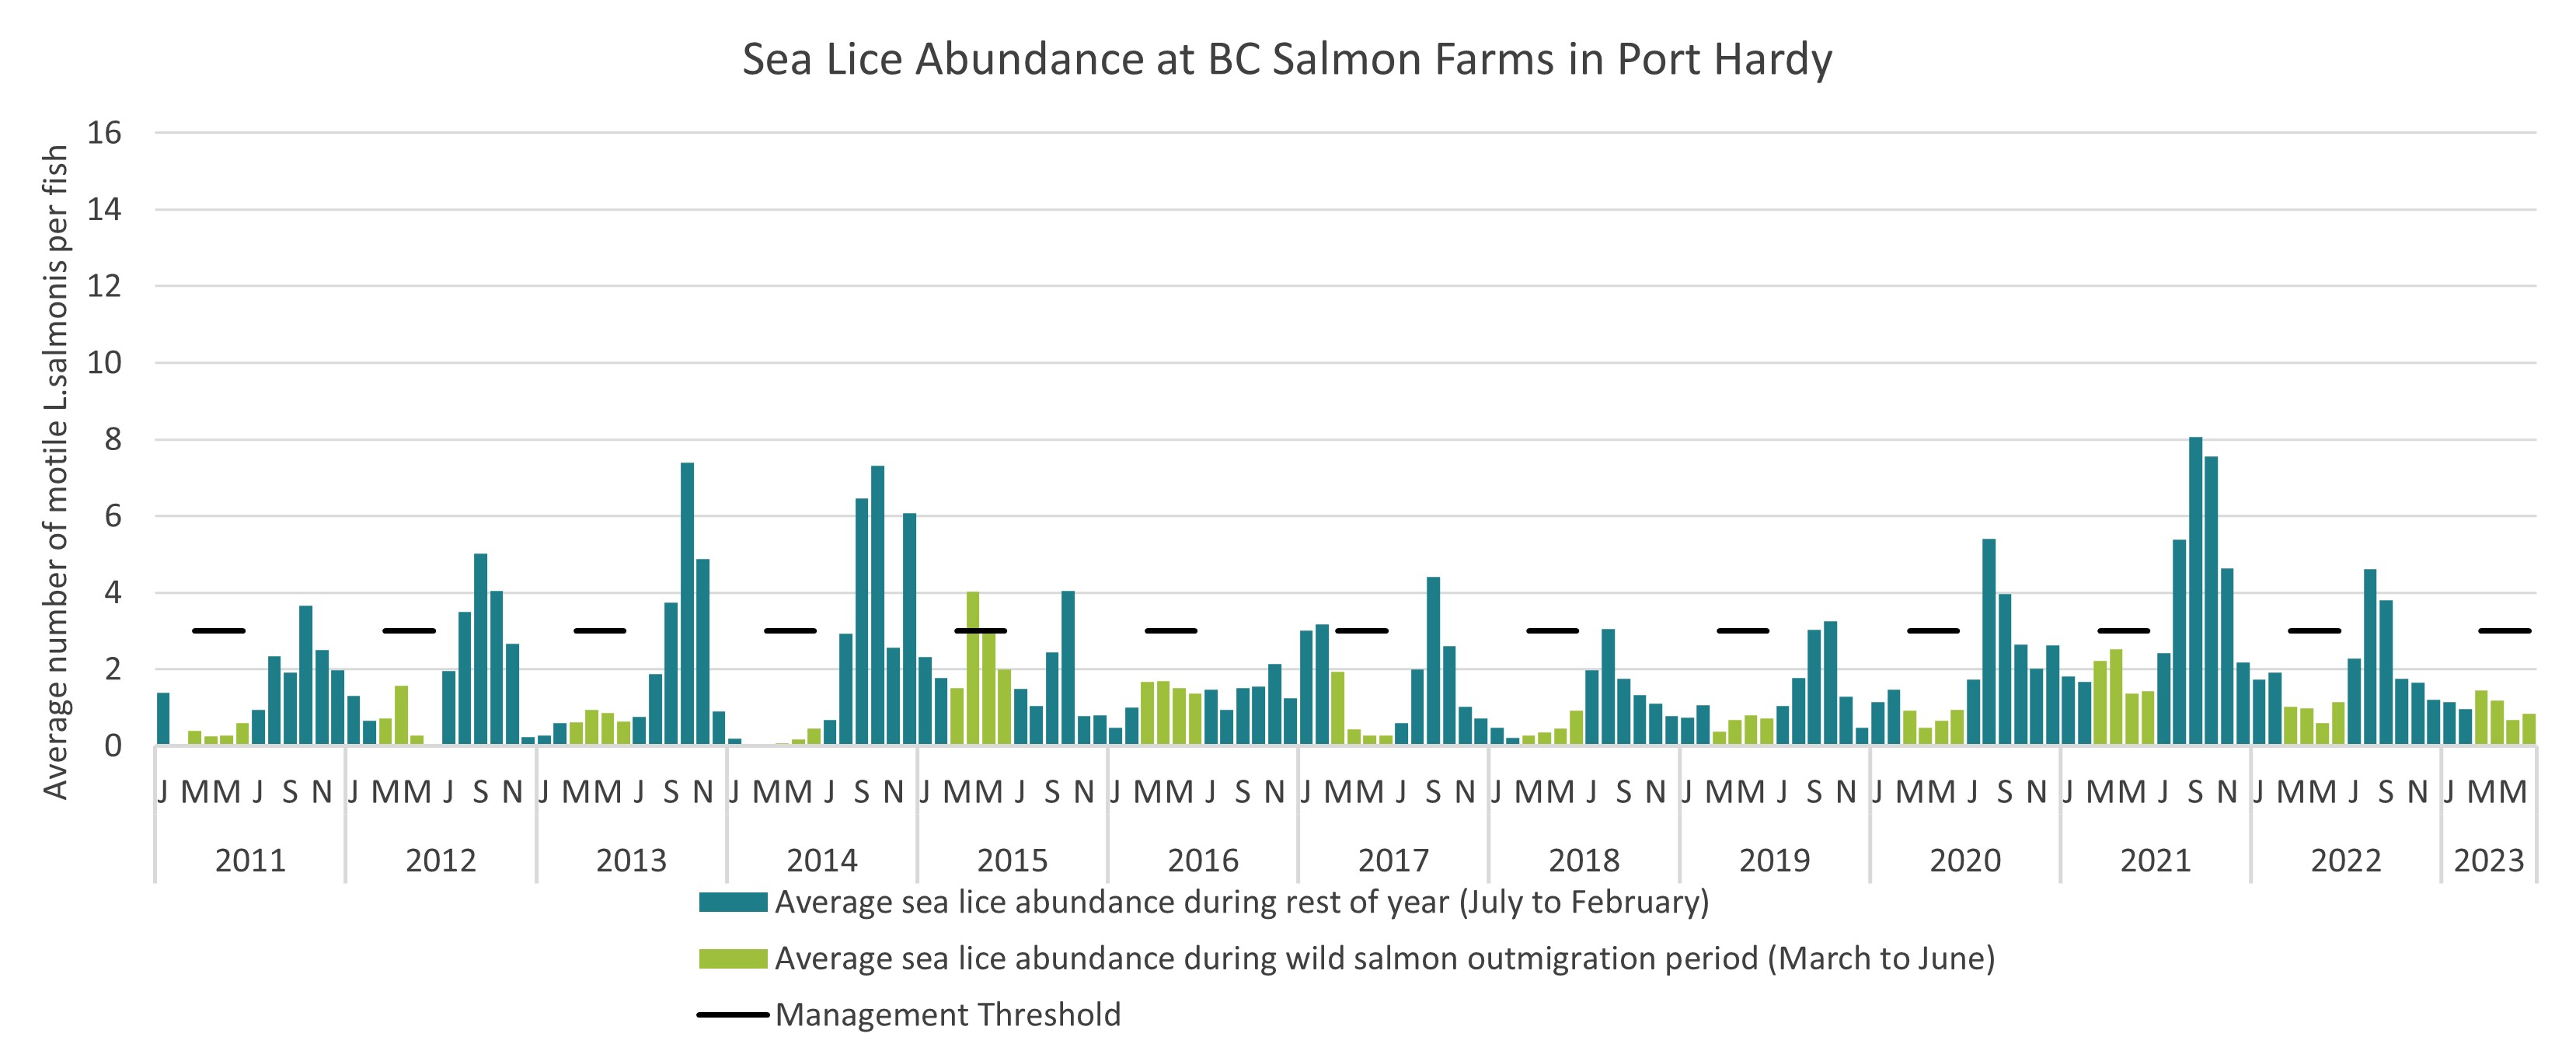 Sea Lice Abundance at BC Salmon Farms in the Port Hardy area, 2011 to 2022